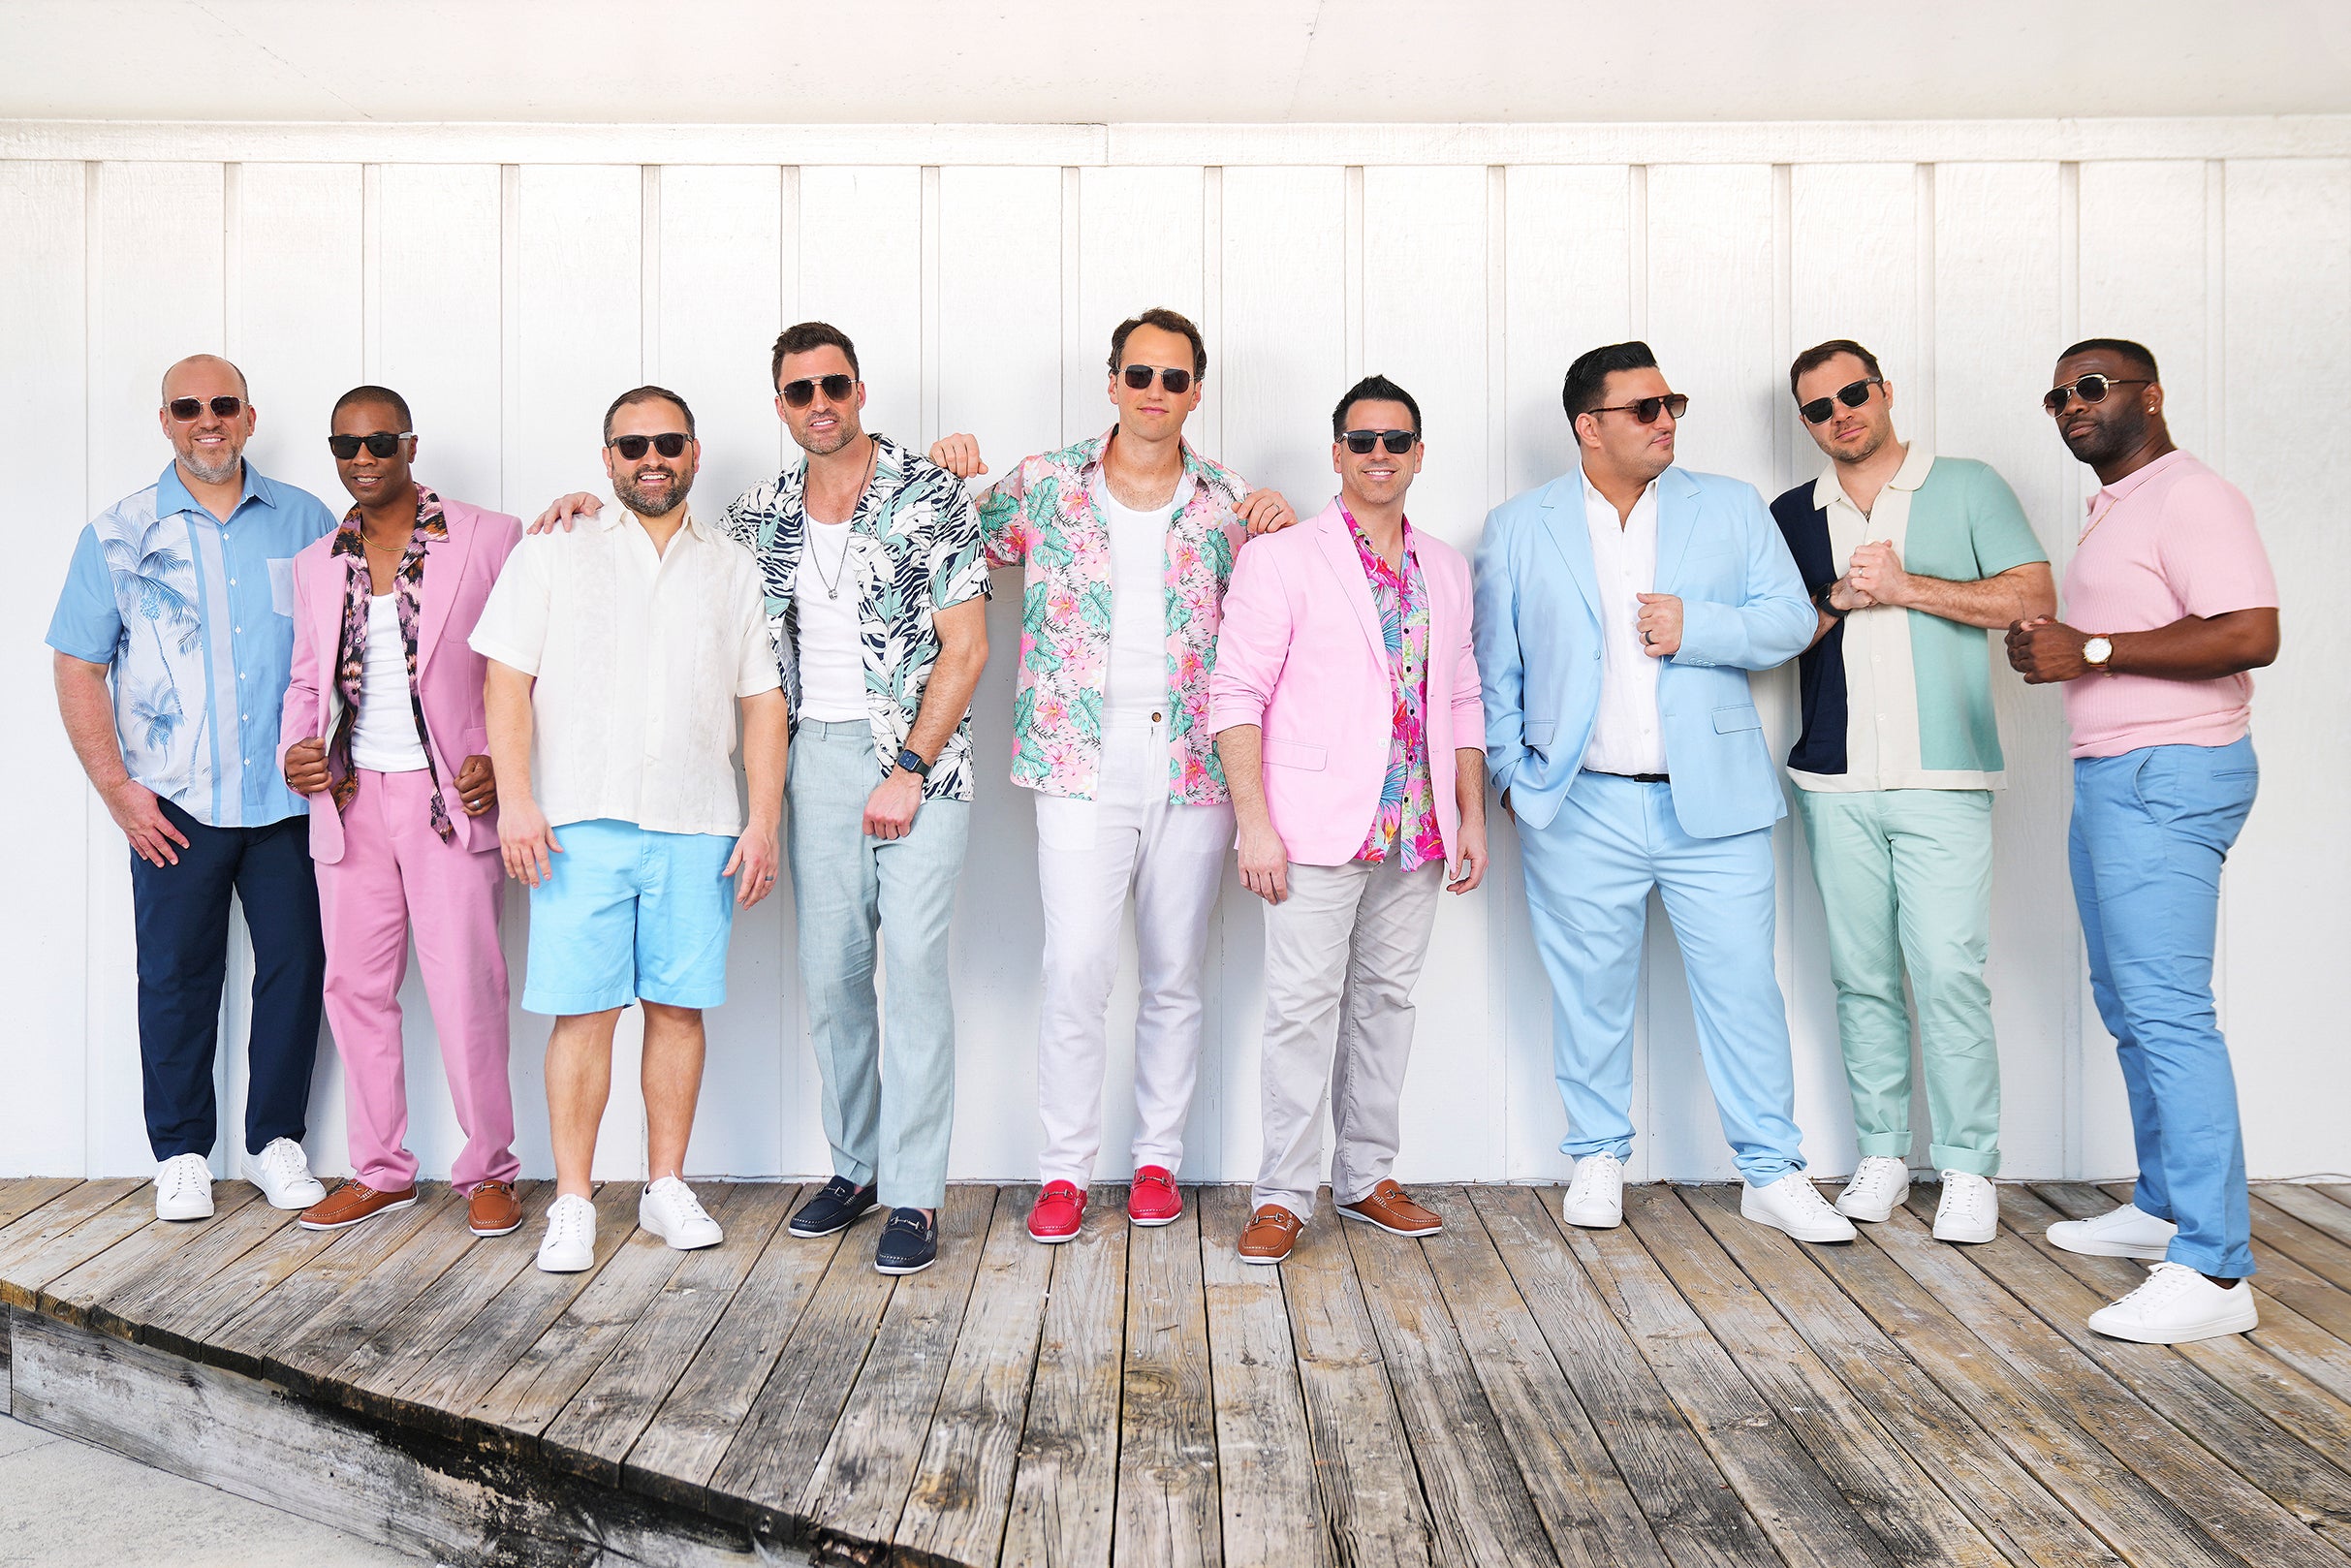 Straight No Chaser - Sleighin It Tour at Taft Theatre